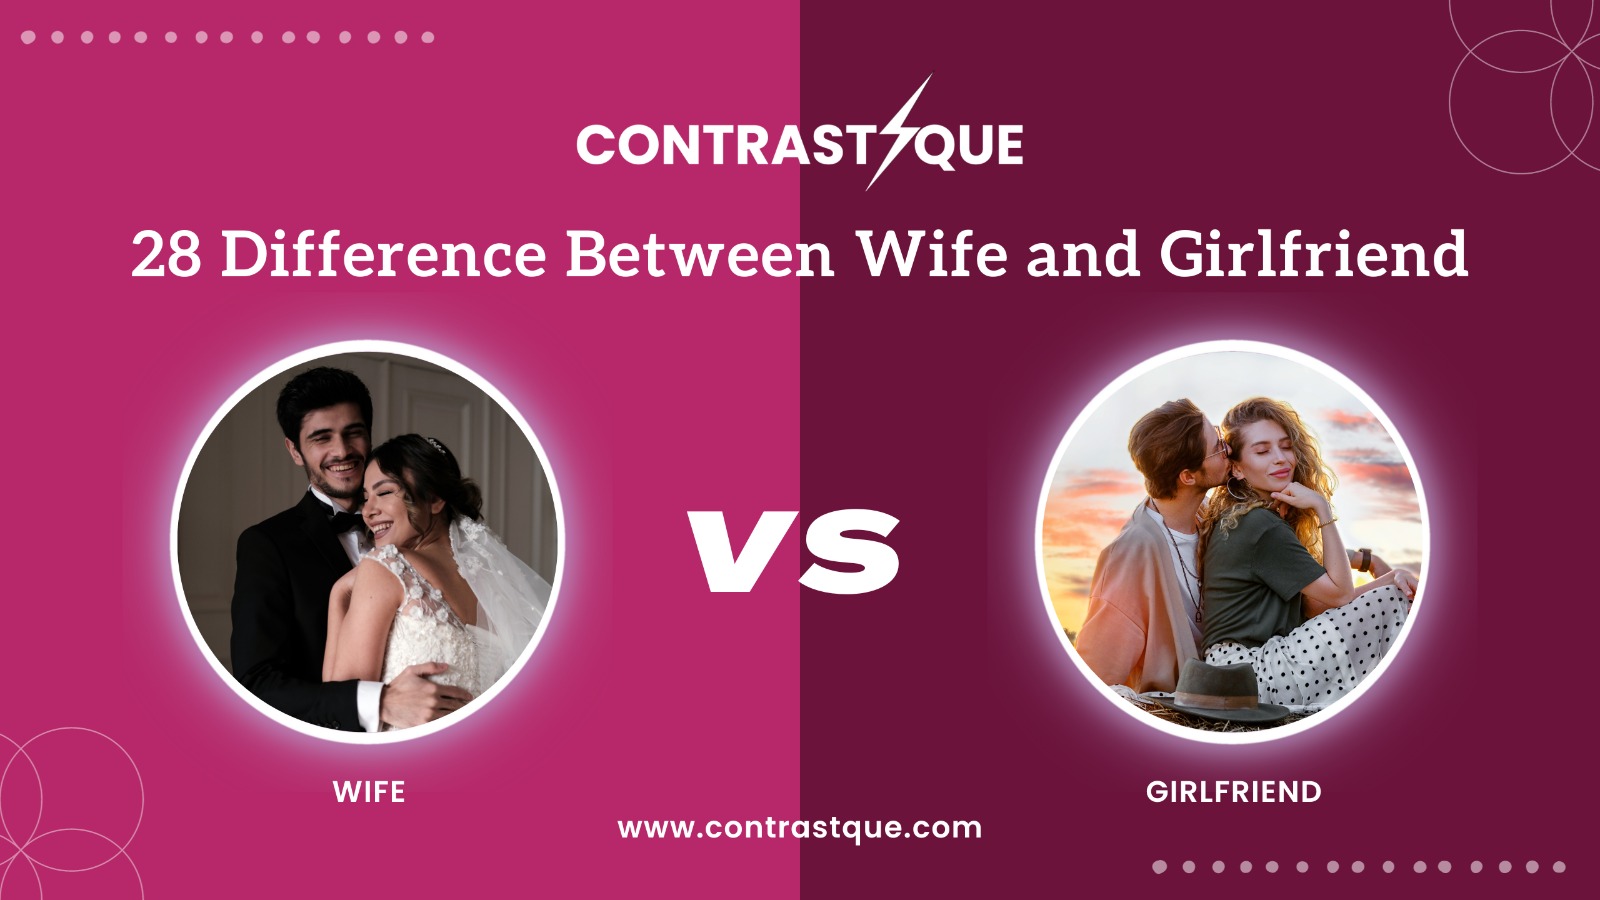 28 Difference Between Wife and Girlfriend